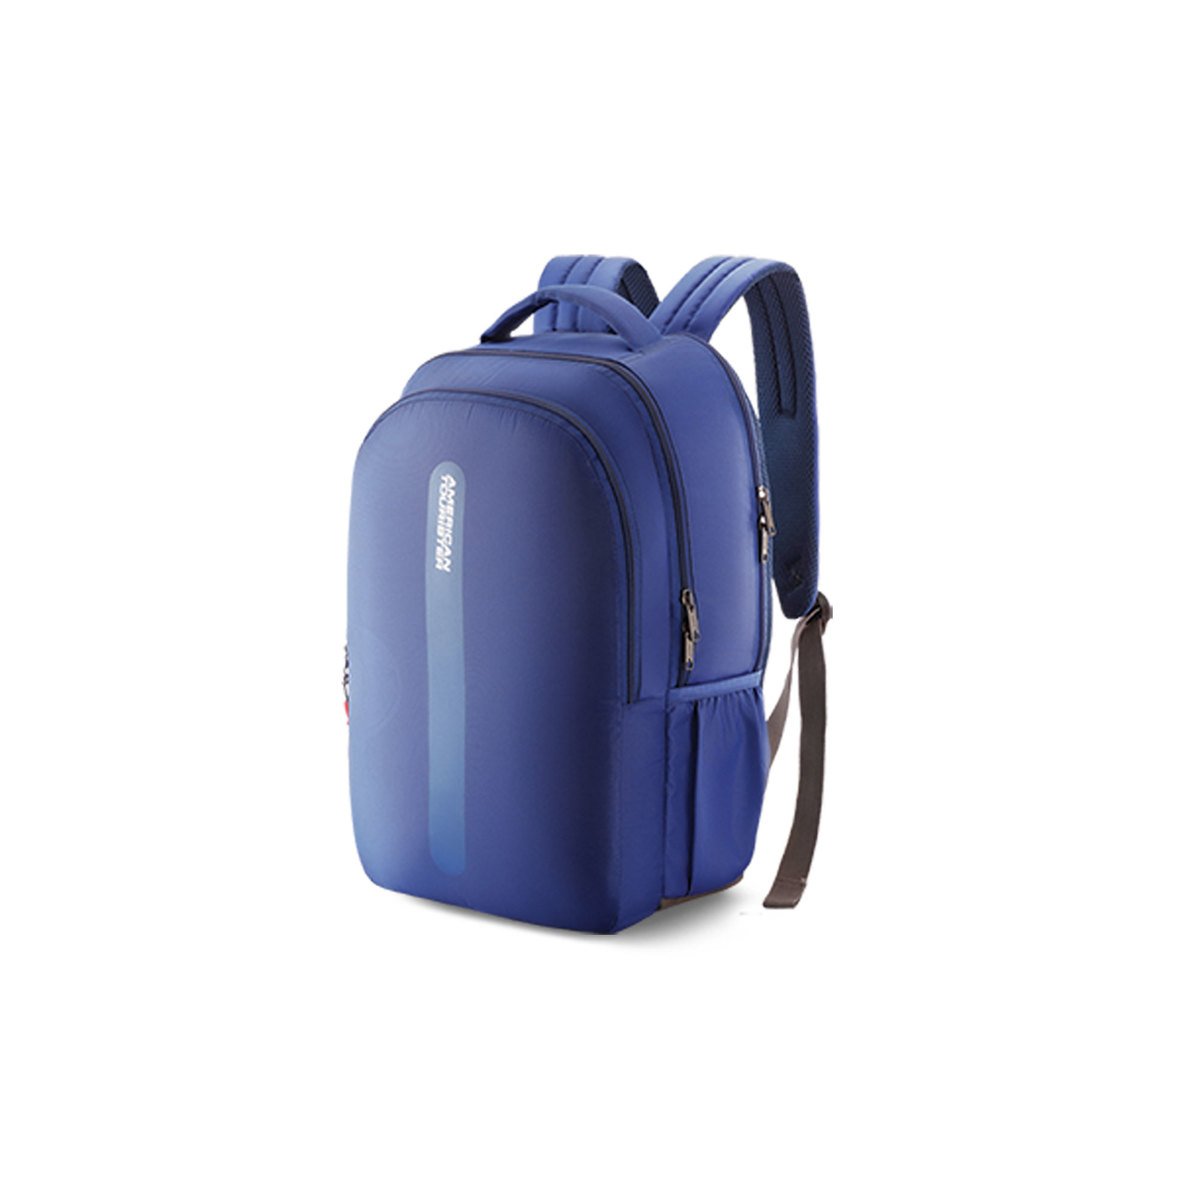 American Tourister School Backpack Forro 17" Blue